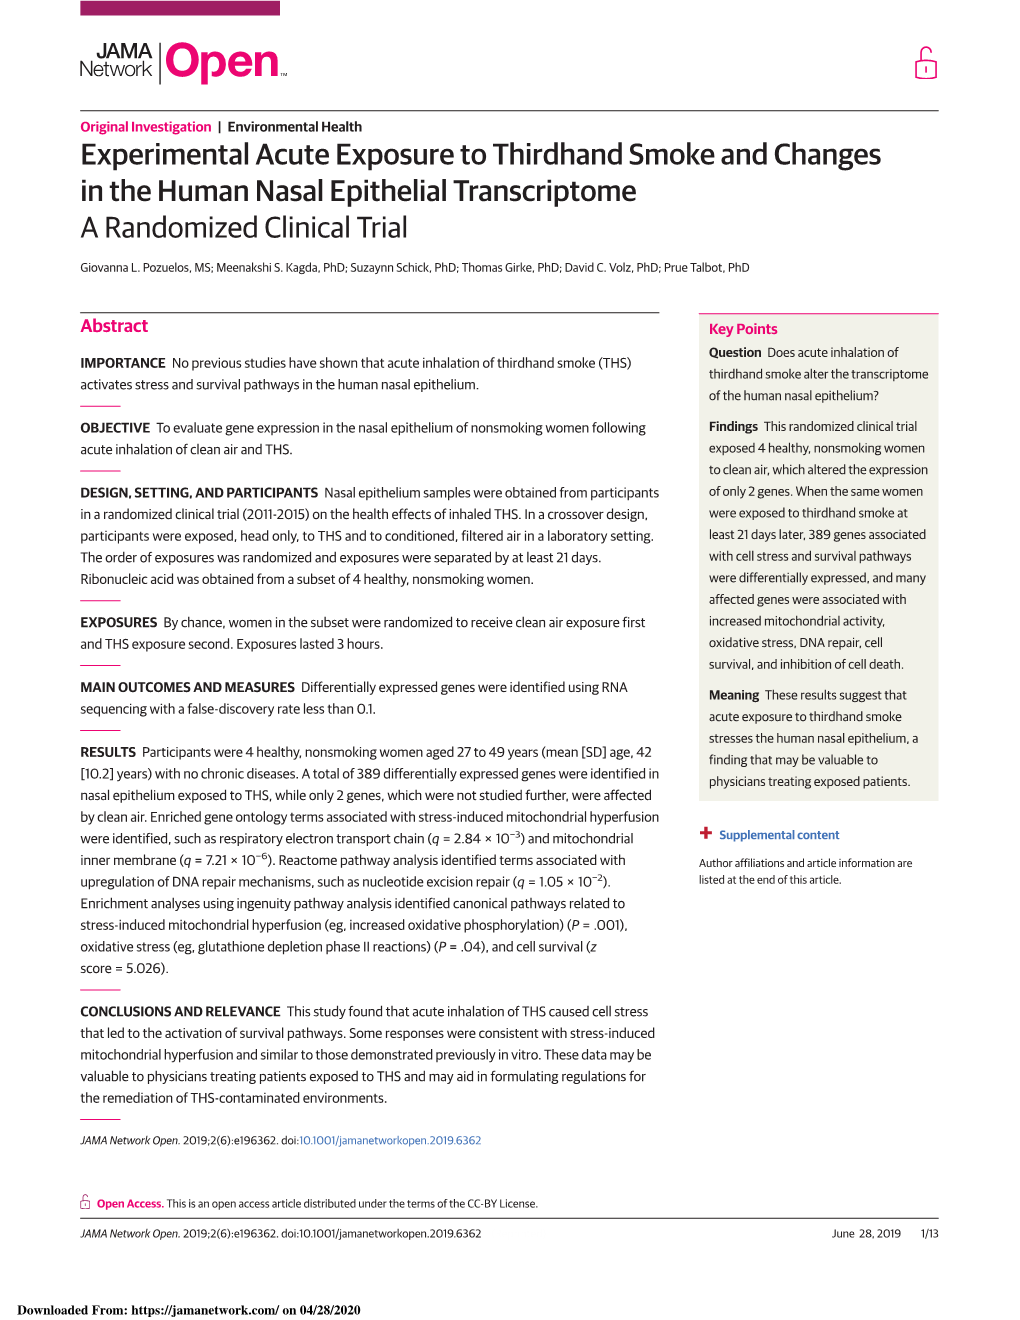 Experimental Acute Exposure to Thirdhand Smoke and Changes in the Human Nasal Epithelial Transcriptome a Randomized Clinical Trial